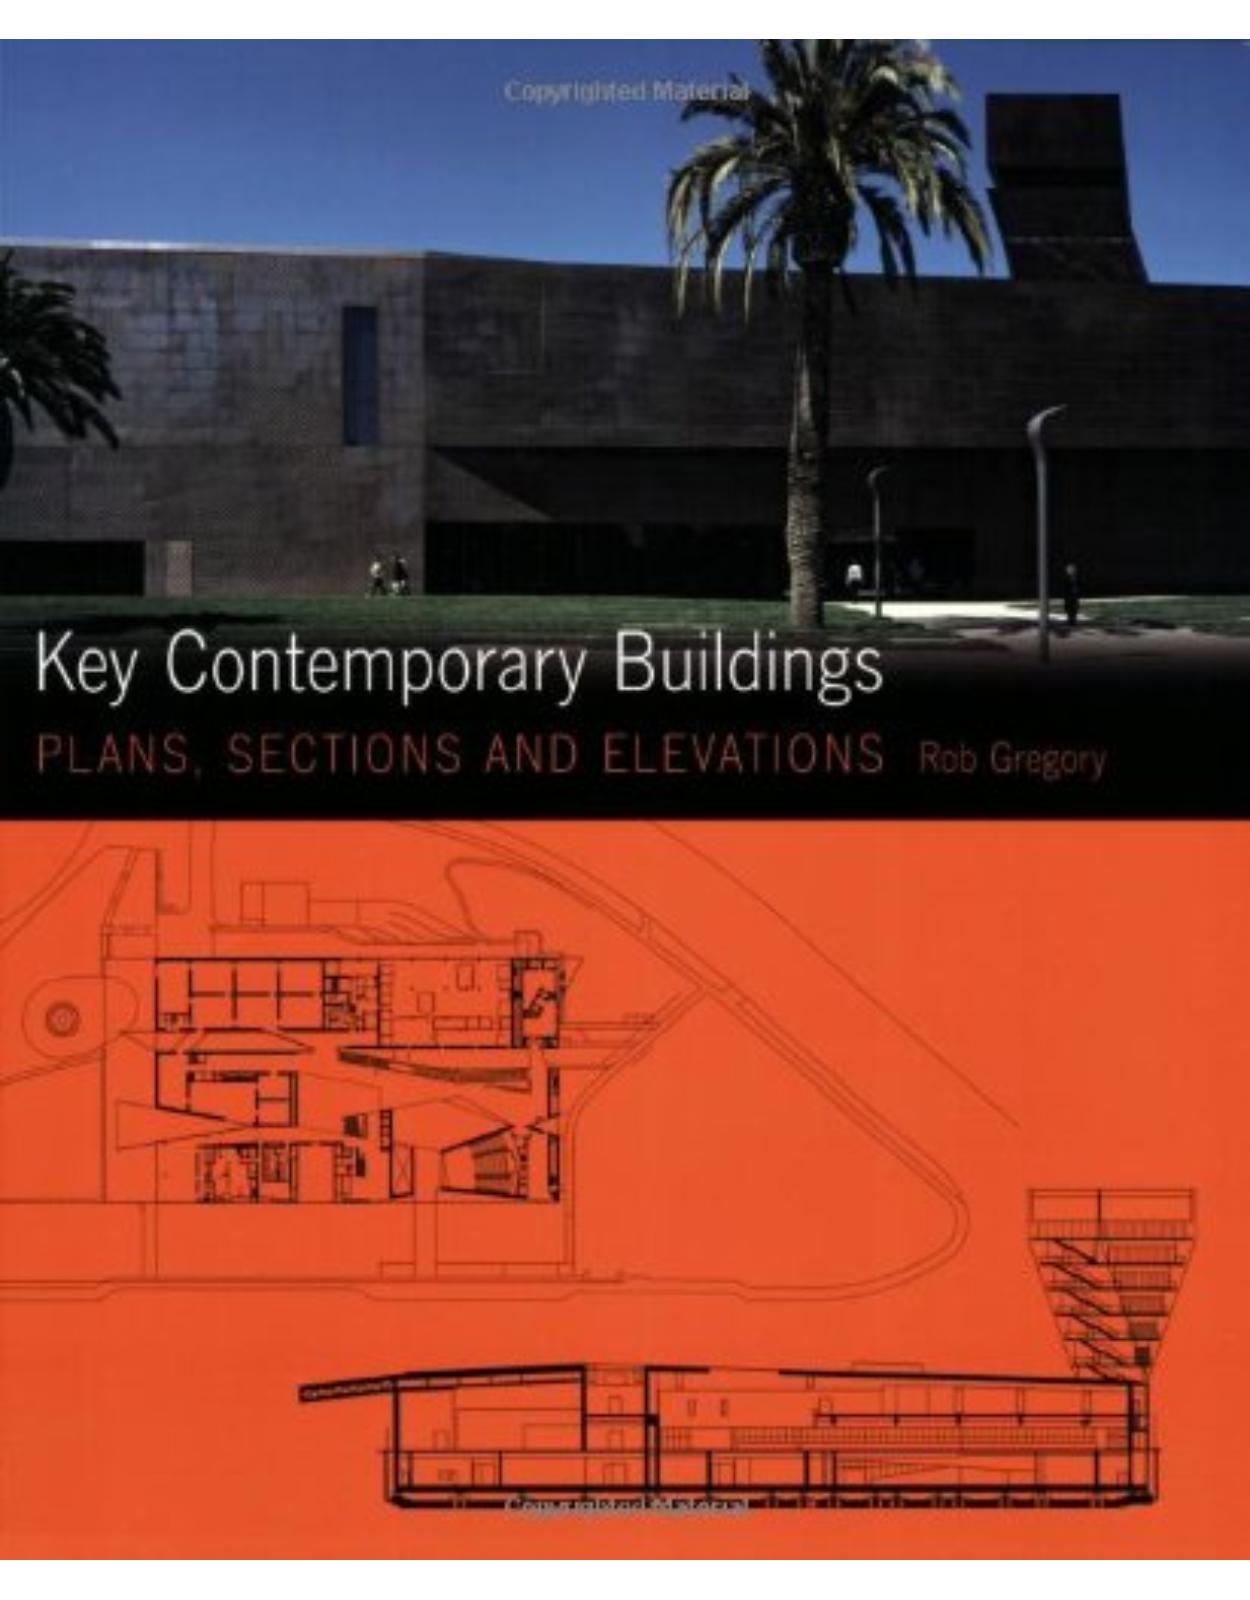 Key Contemporary Buildings: Plans, Sections and Elevations